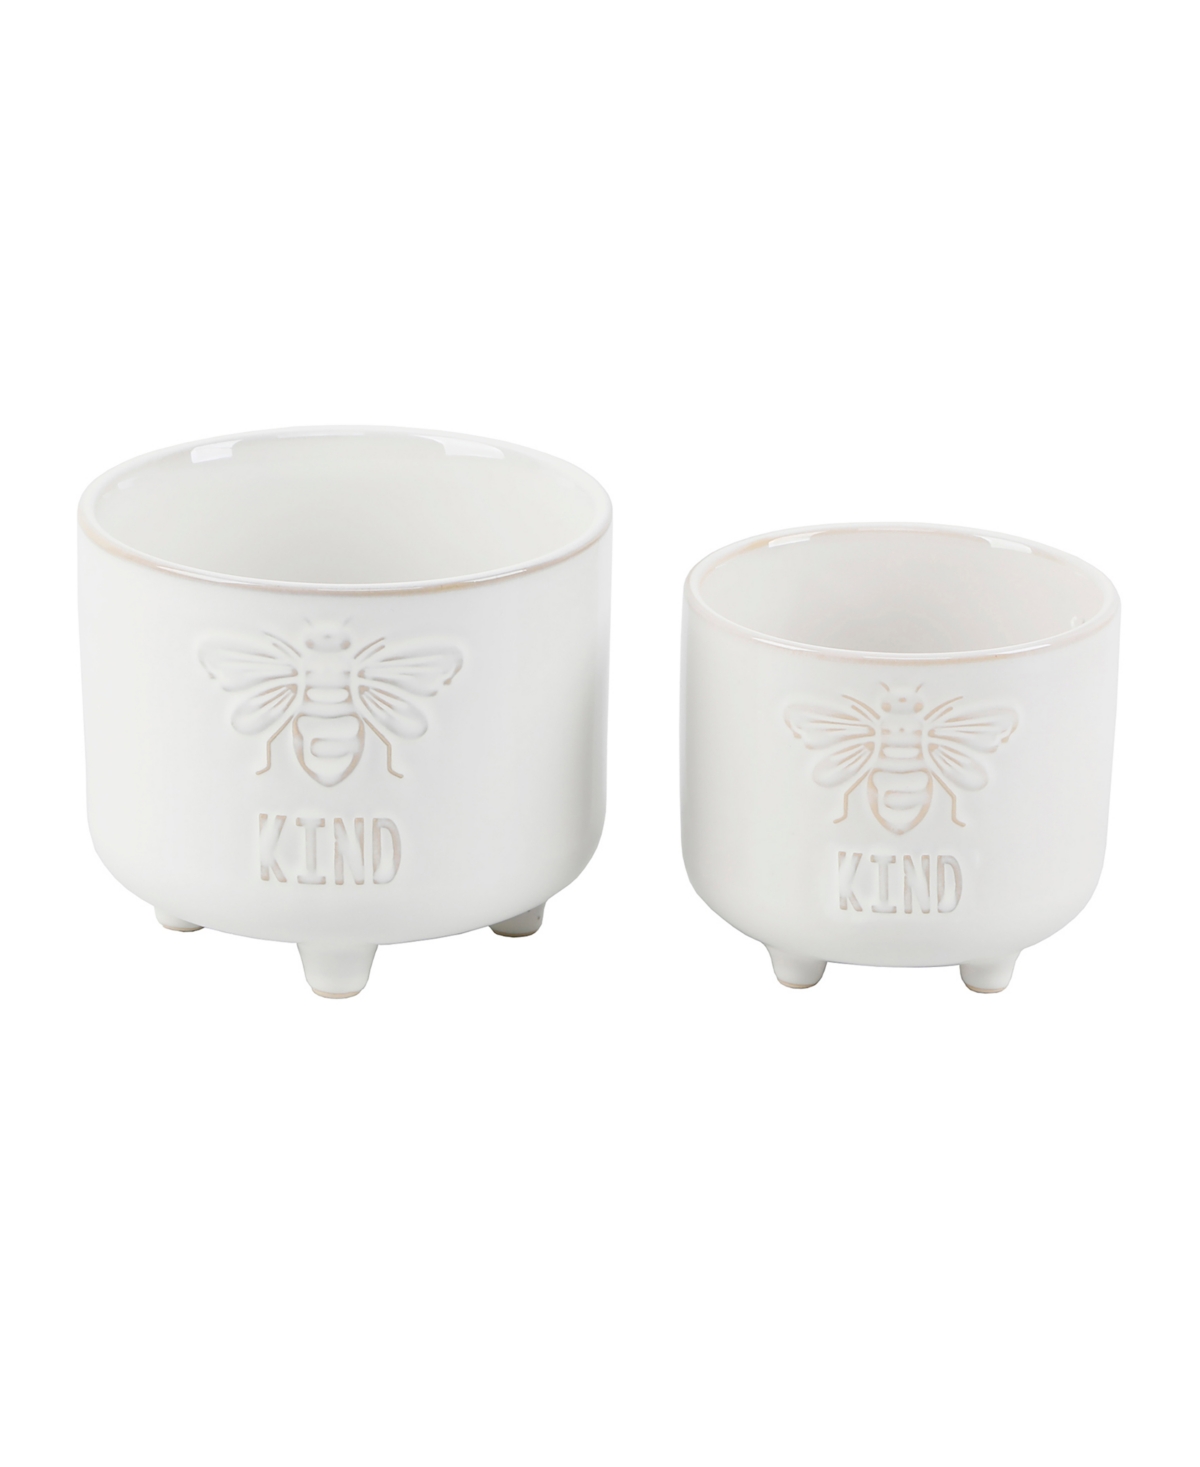 Be Kind Footed Ceramic Planter, Set of 2 - Ivory